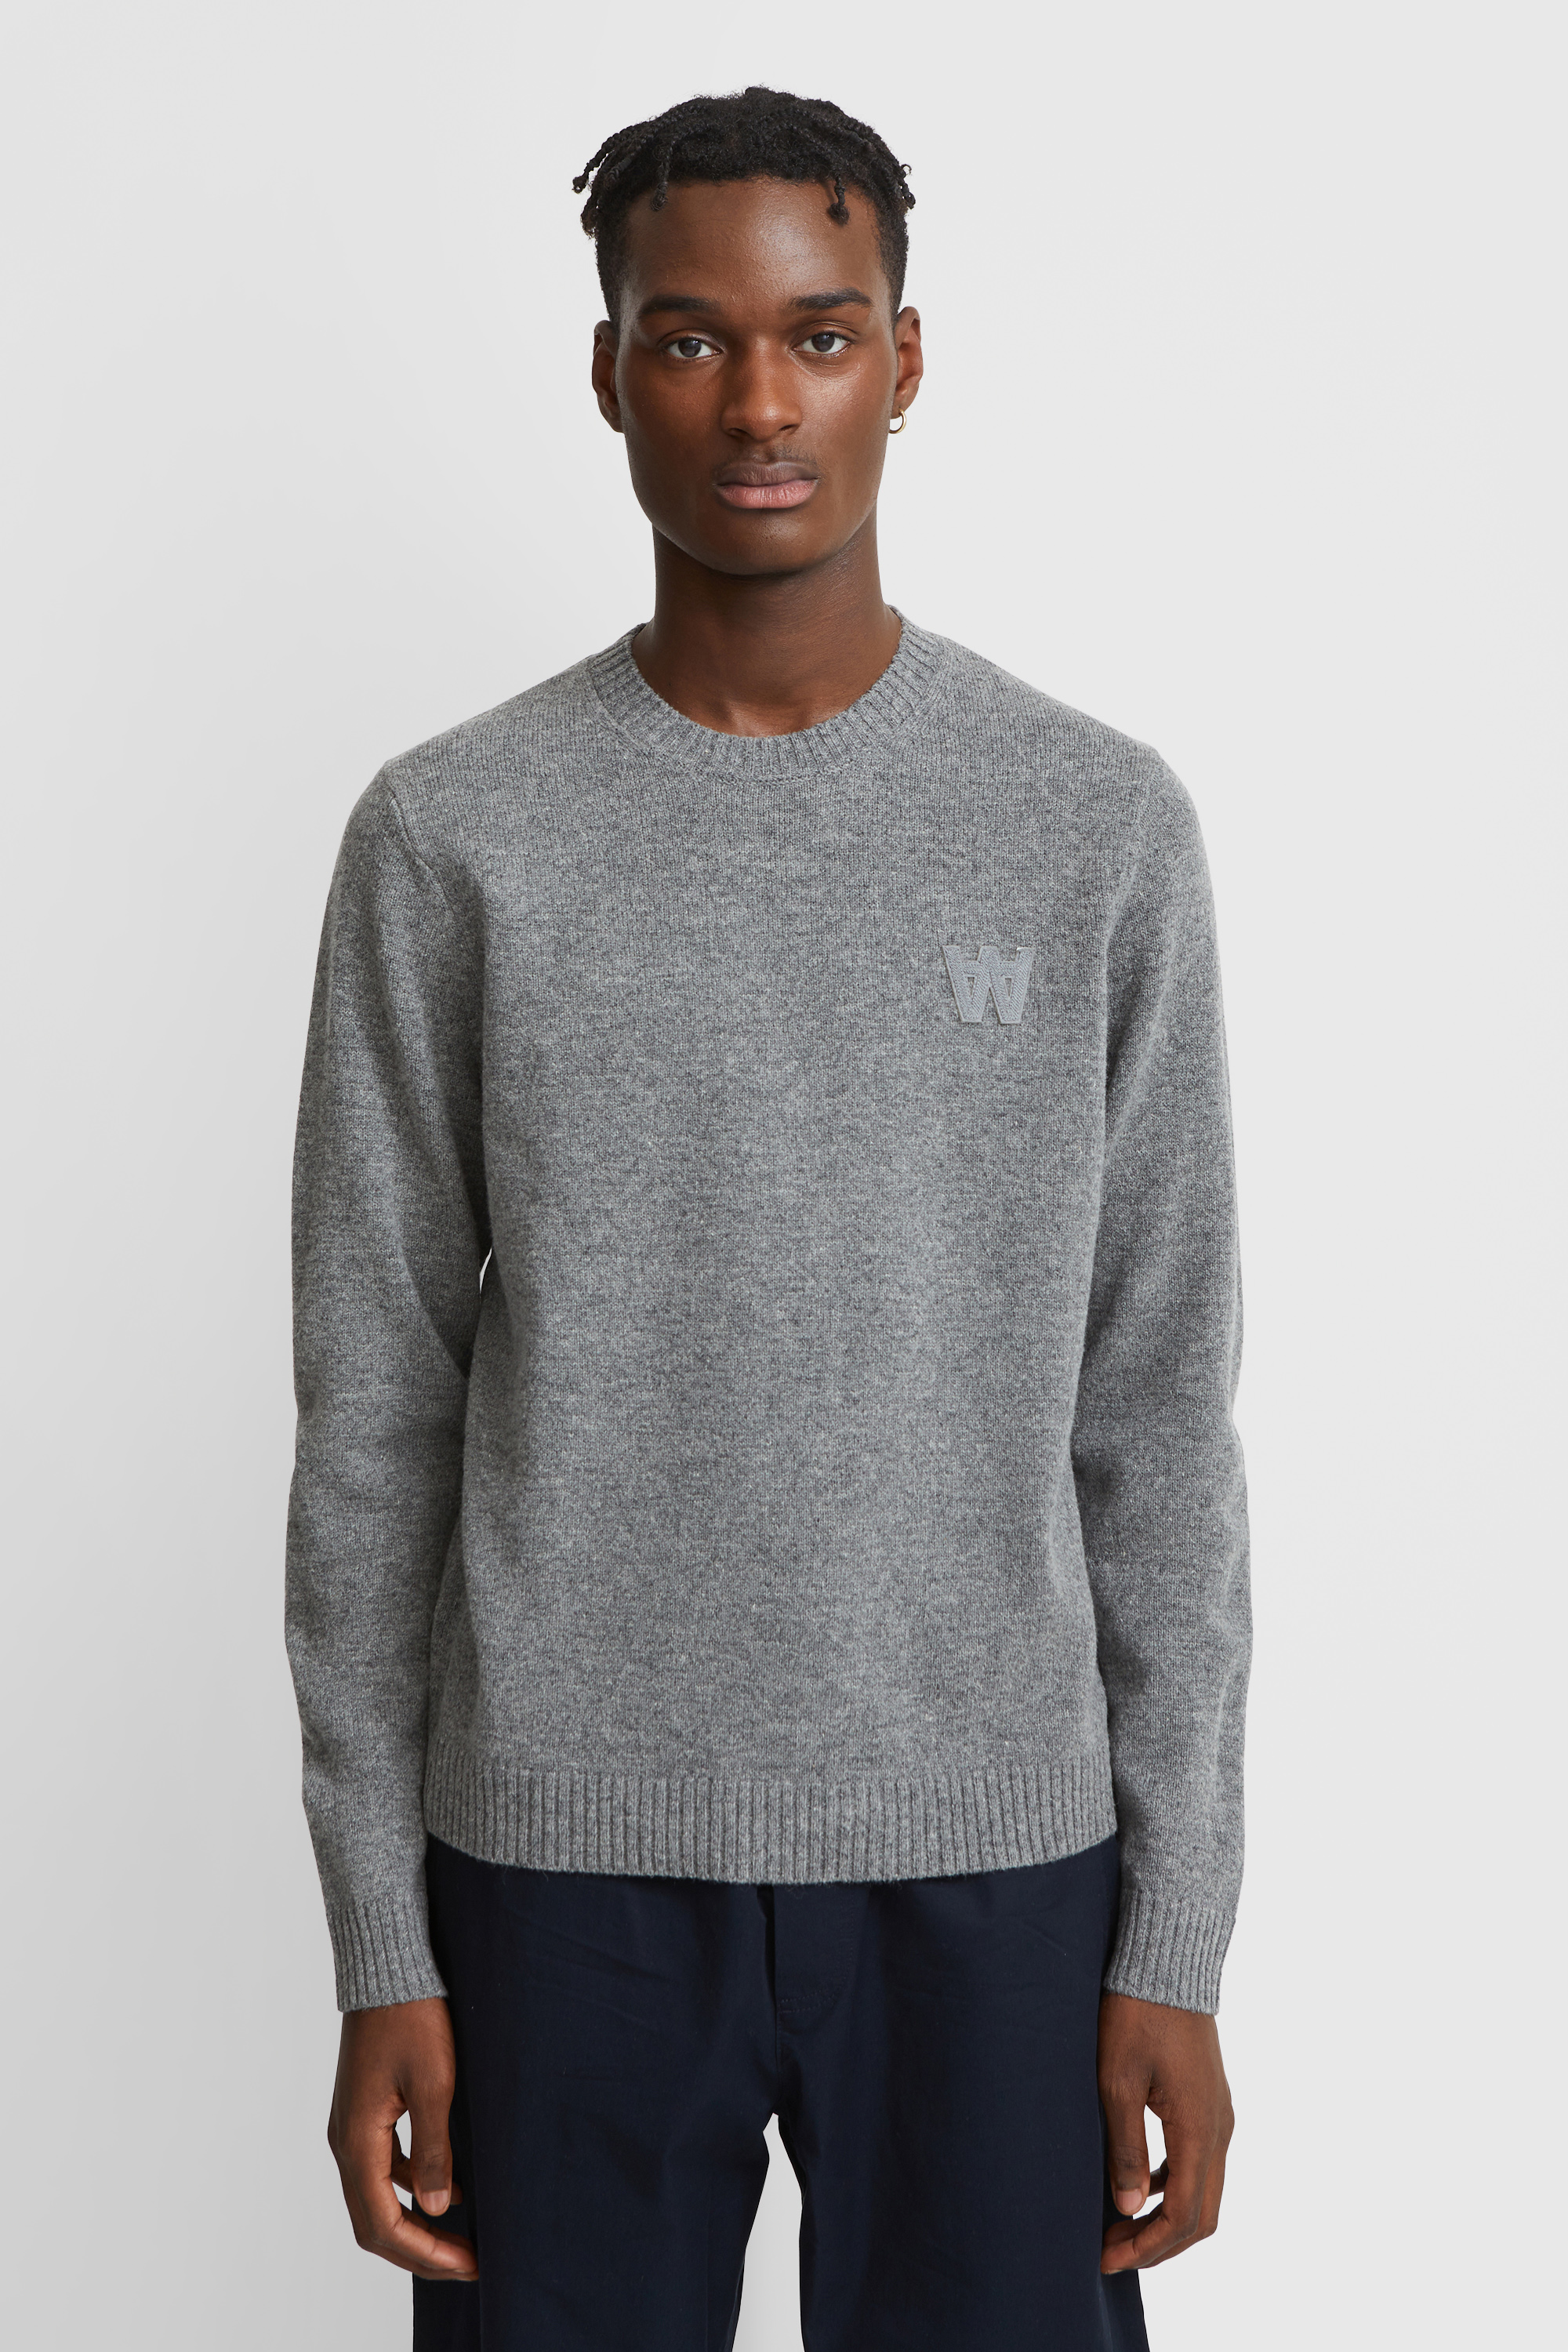 Double A by Wood Wood Kevin lambswool jumper Grey melange | WoodWood.com